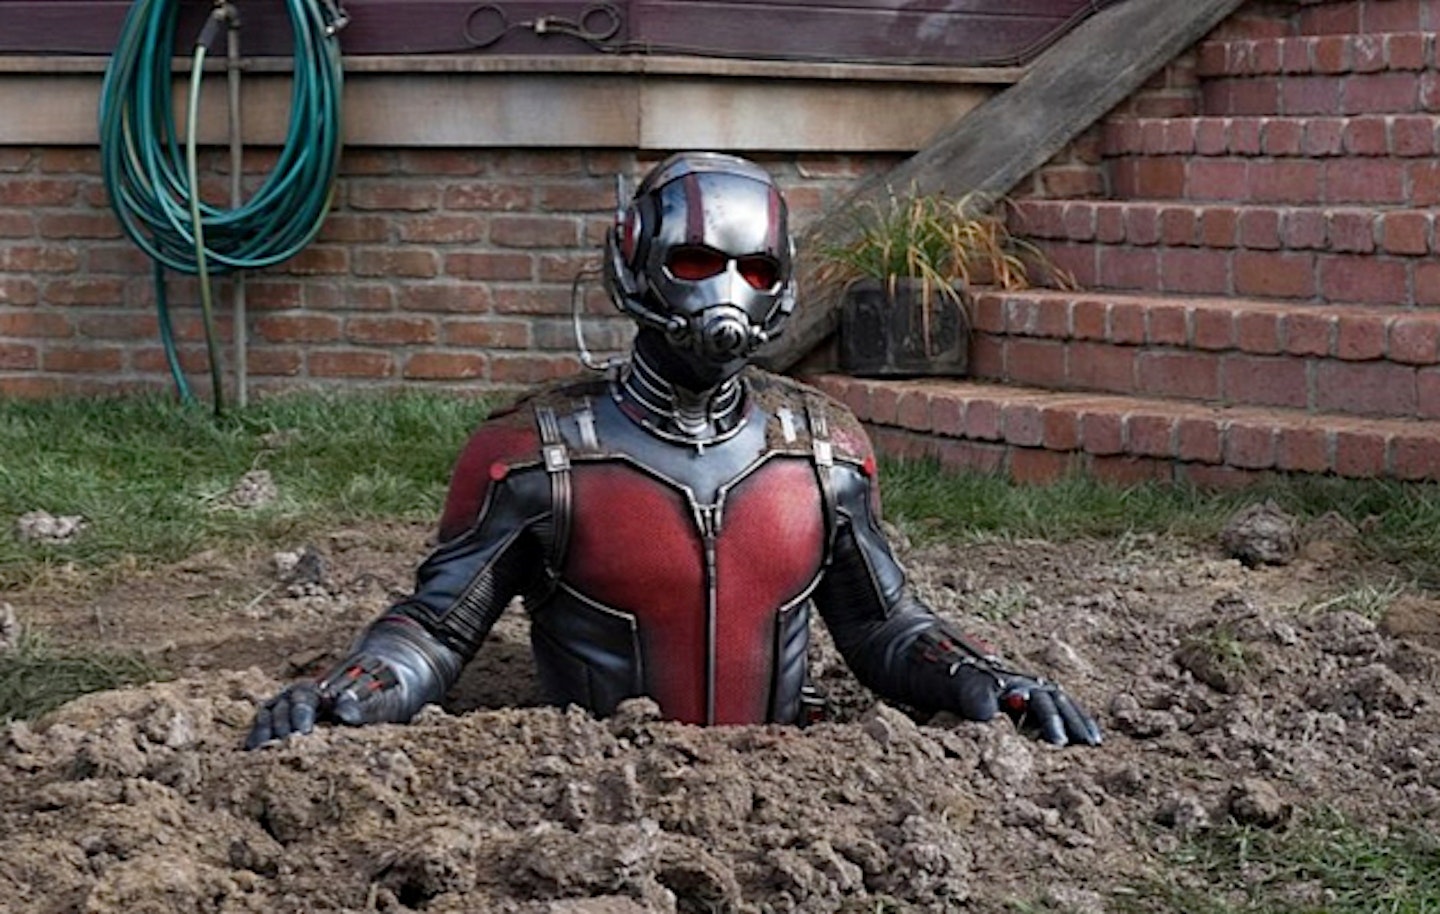 Ant-Man' tops North American box office for 2nd weekend 